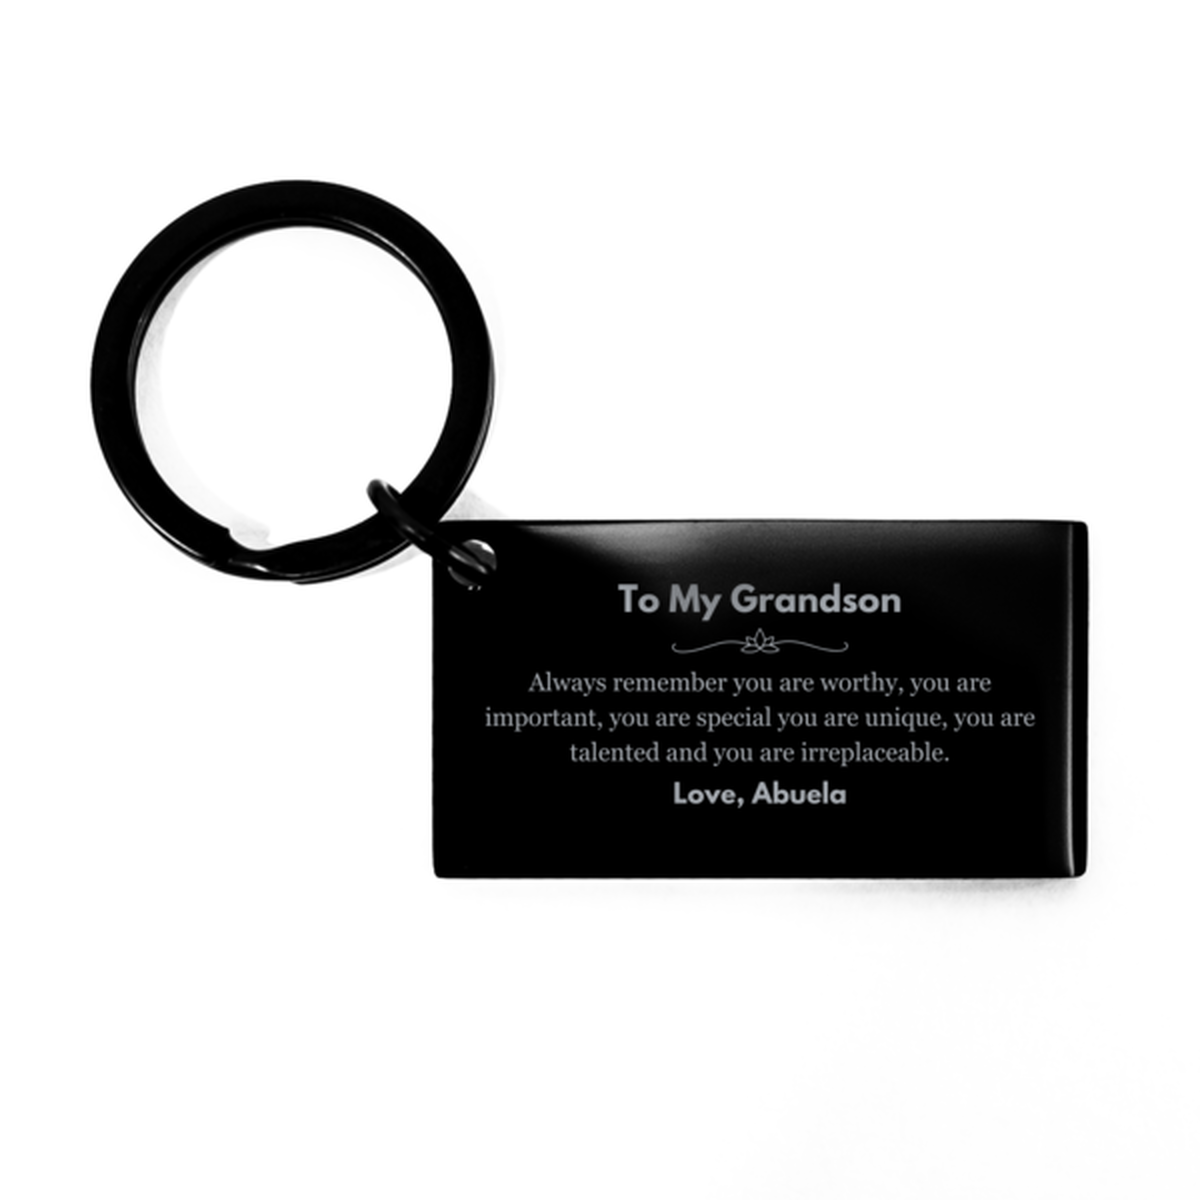 Grandson Birthday Gifts from Abuela, Inspirational Keychain for Grandson Christmas Graduation Gifts for Grandson Always remember you are worthy, you are important. Love, Abuela